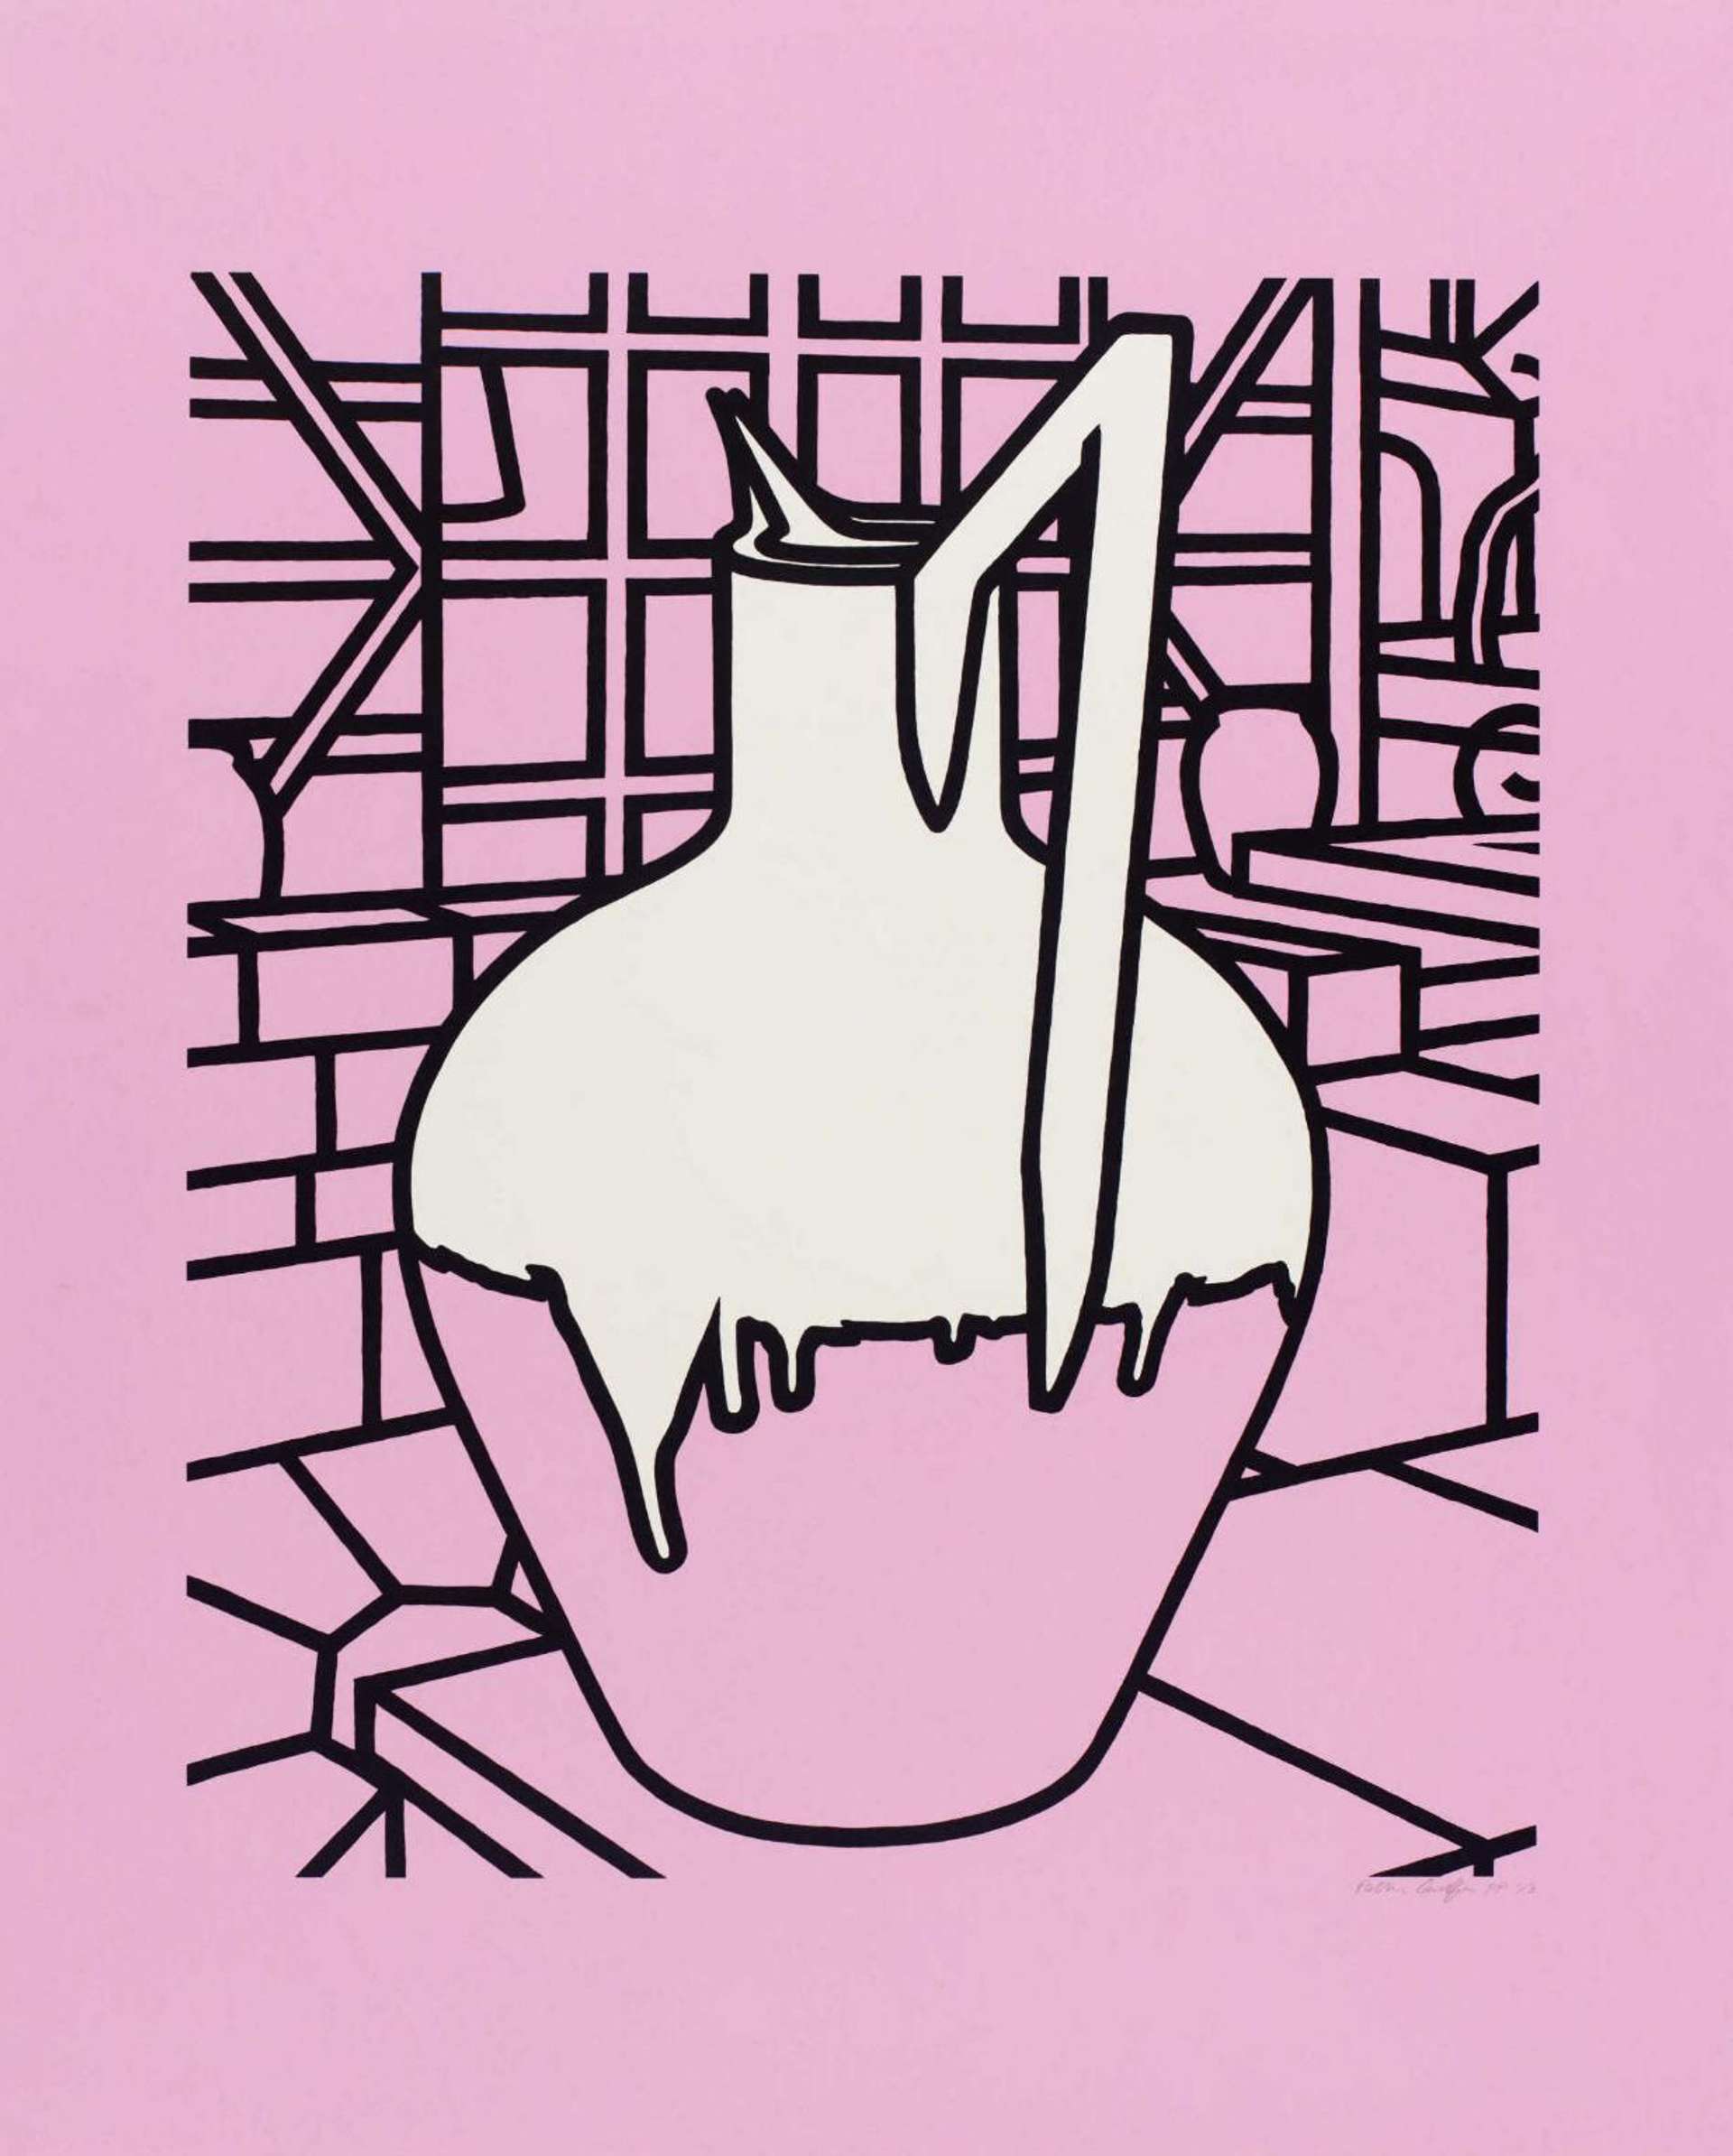 An image of the print Jug by Patrick Caulfield. It shows the outline of a jug within a kitchen, all drawn in black lines against a bright pink background. The top half of the jug is highlighted in white.